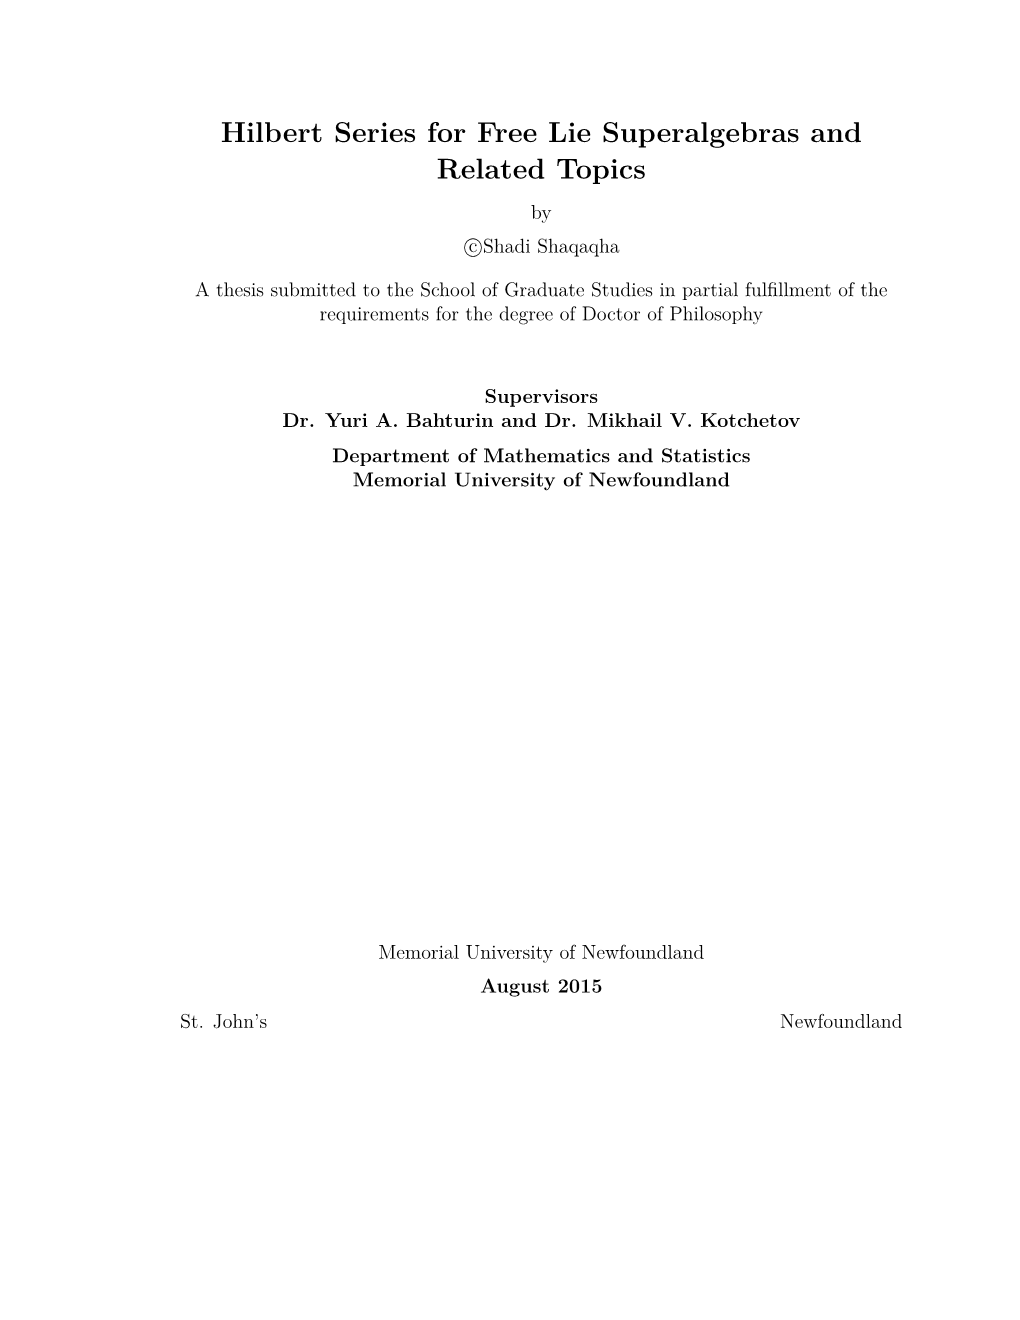 Hilbert Series for Free Lie Superalgebras and Related Topics by C Shadi Shaqaqha